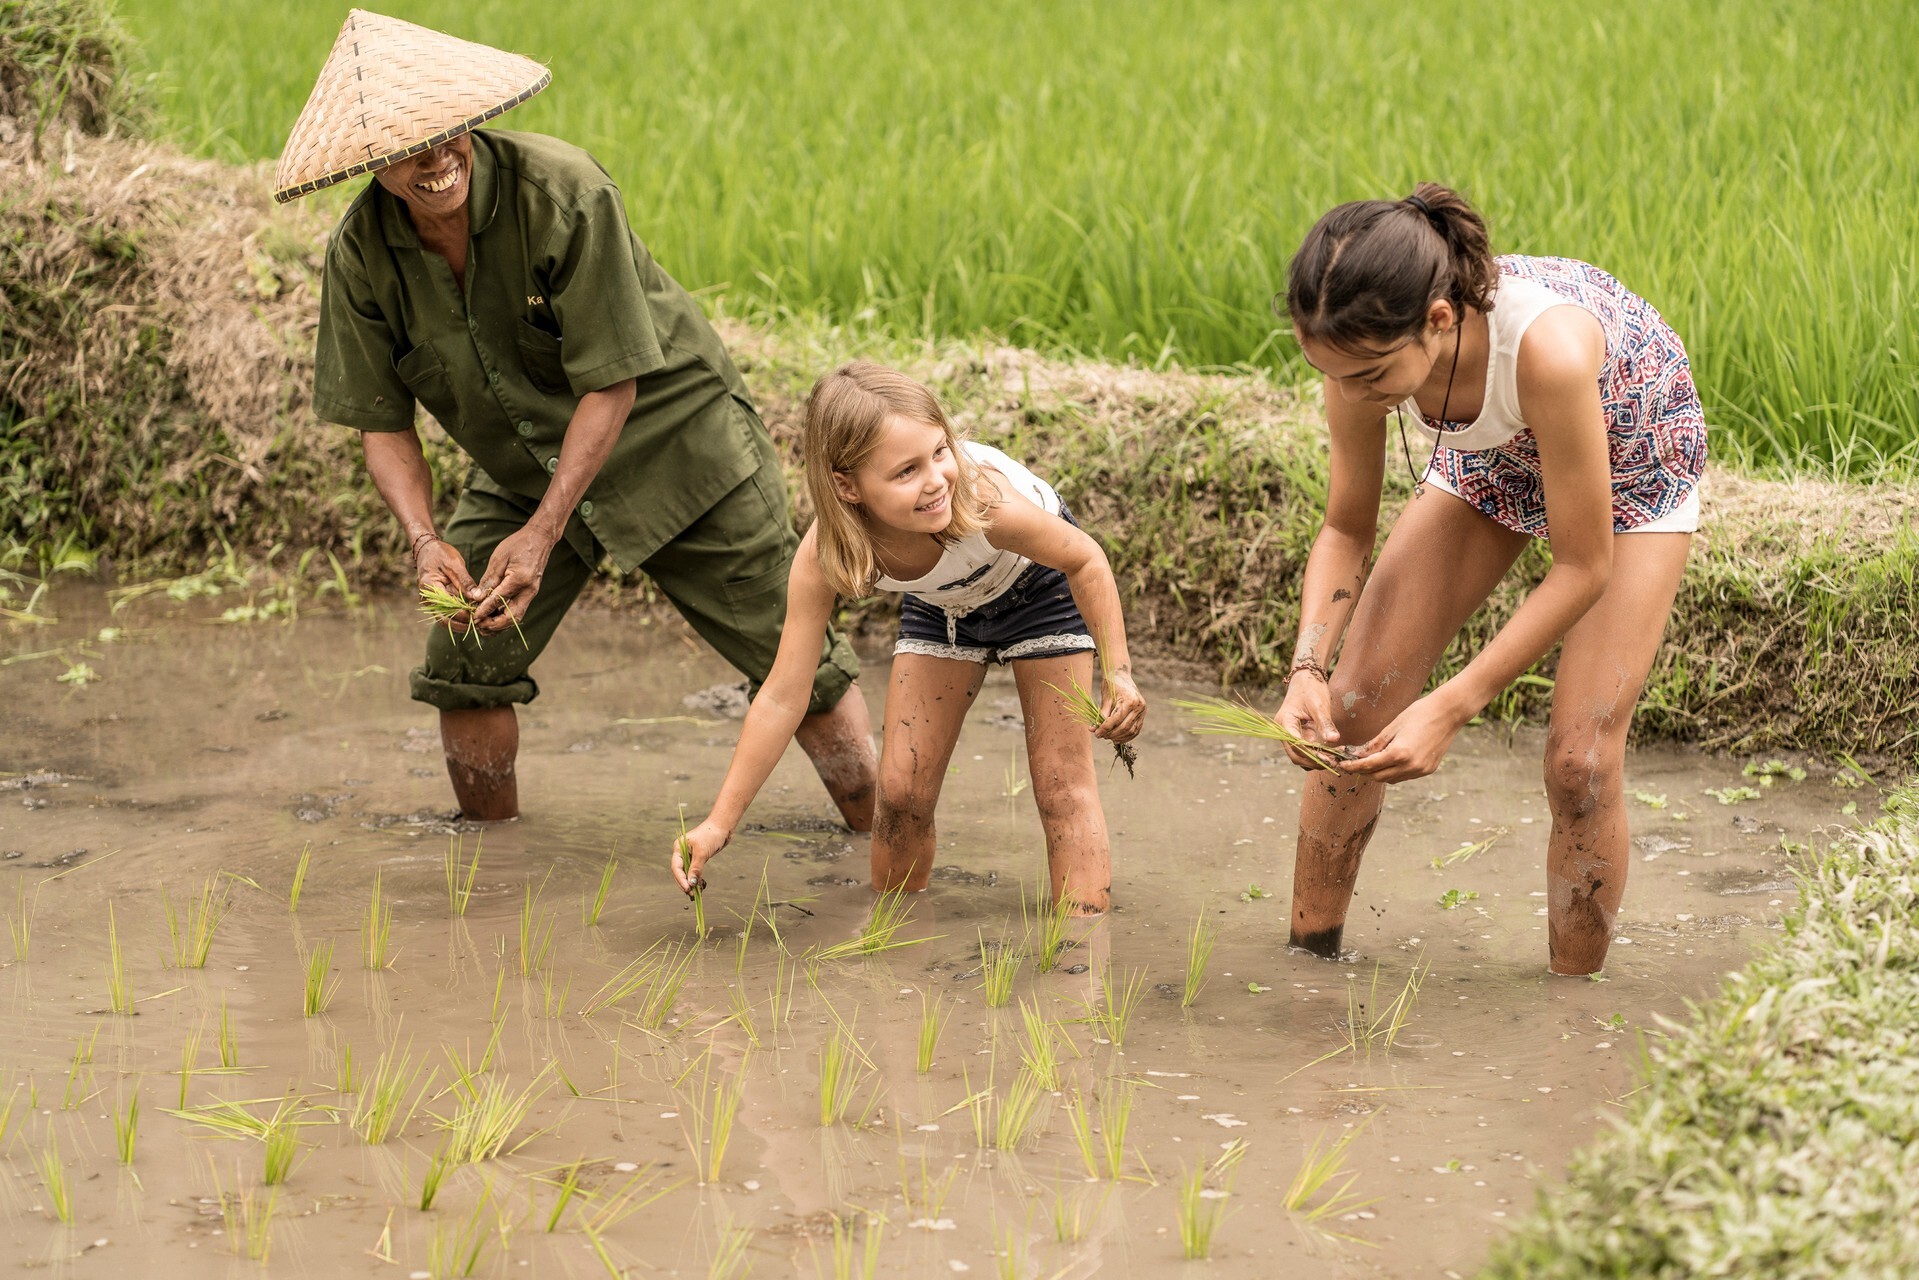 Roll up your sleeves and enjoy some agritourism with the Four Seasons in Bali. Photo: Lightfoot Travel